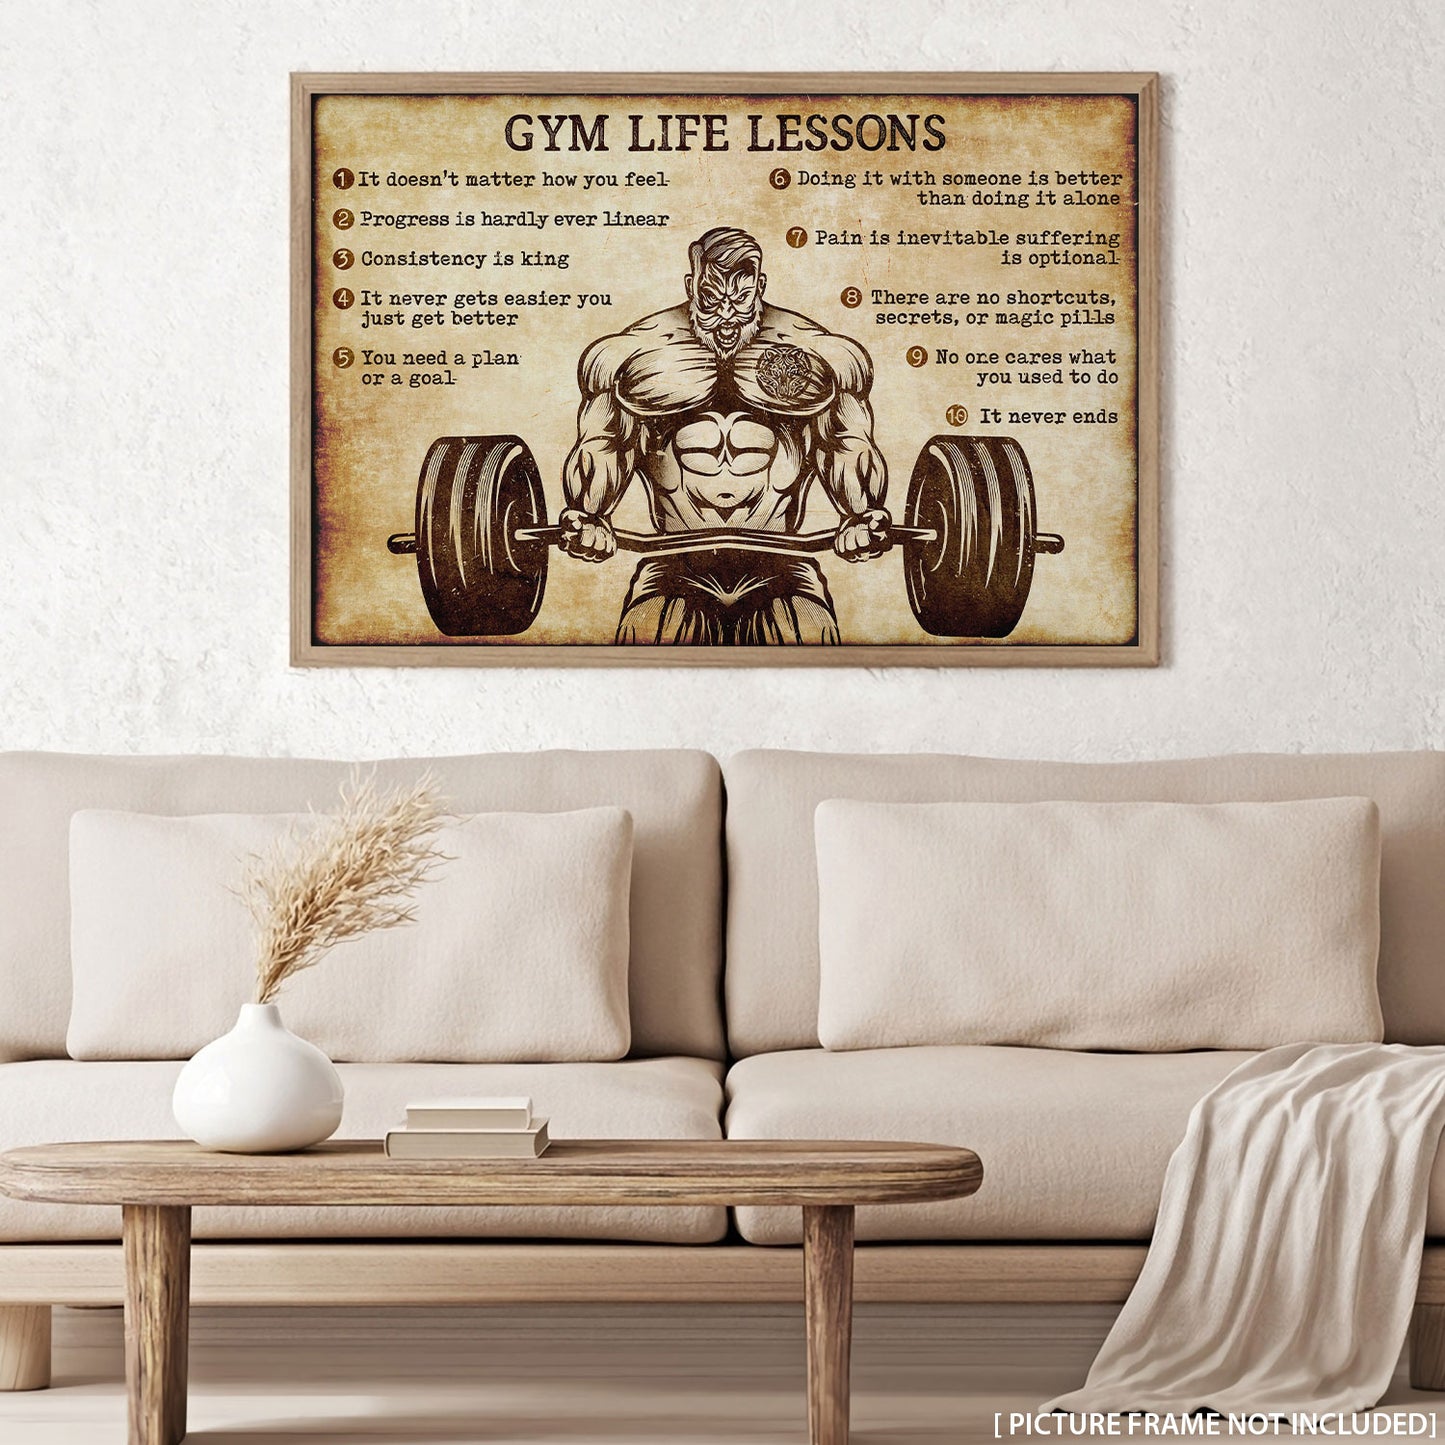 Gym Life Lessons - Personalizedwitch Horizontal Poster  For Gymer